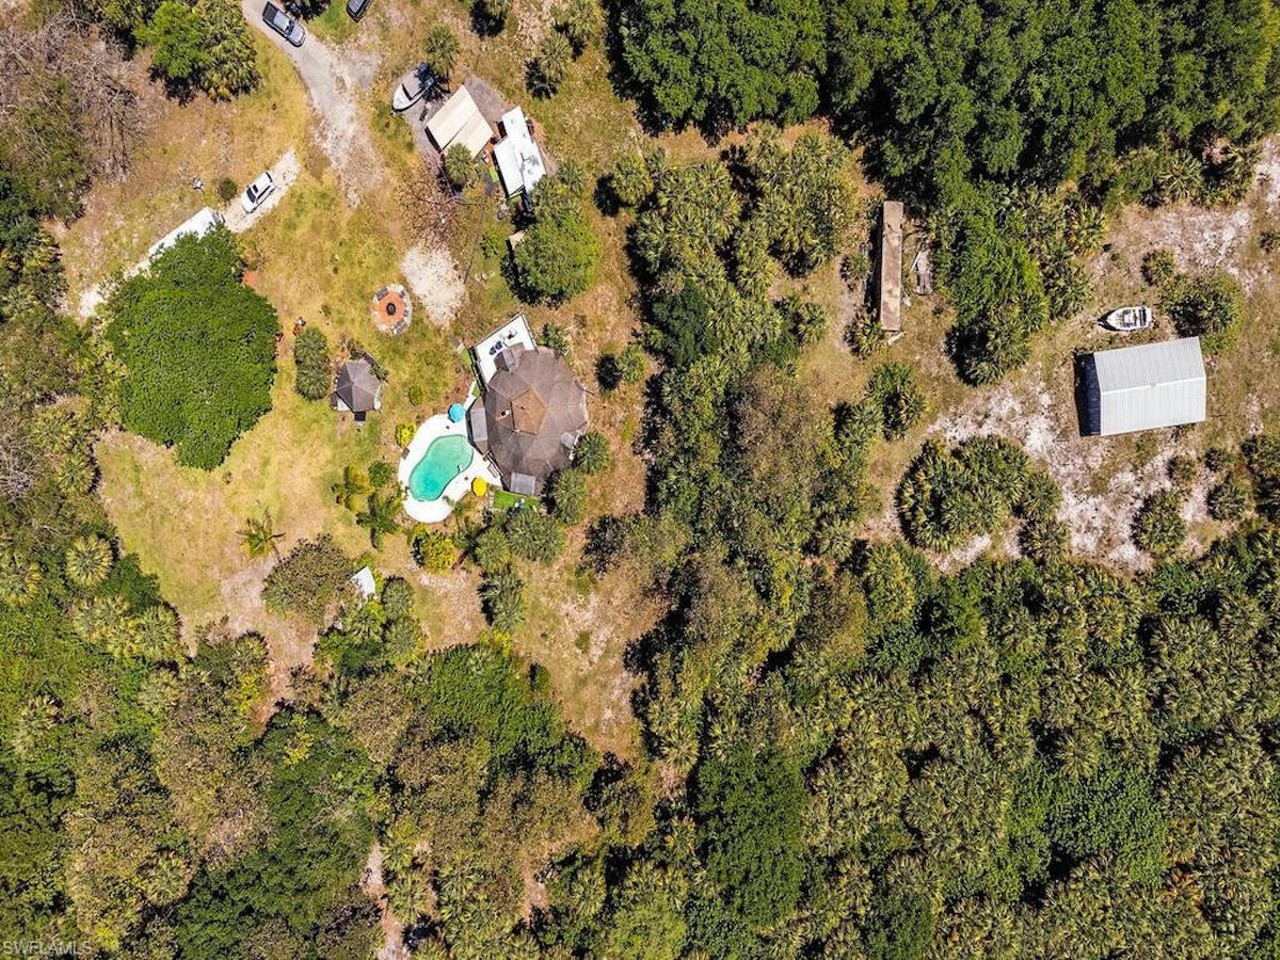 'Dome of the Glades,'a rare two-story Florida dome home is now for sale